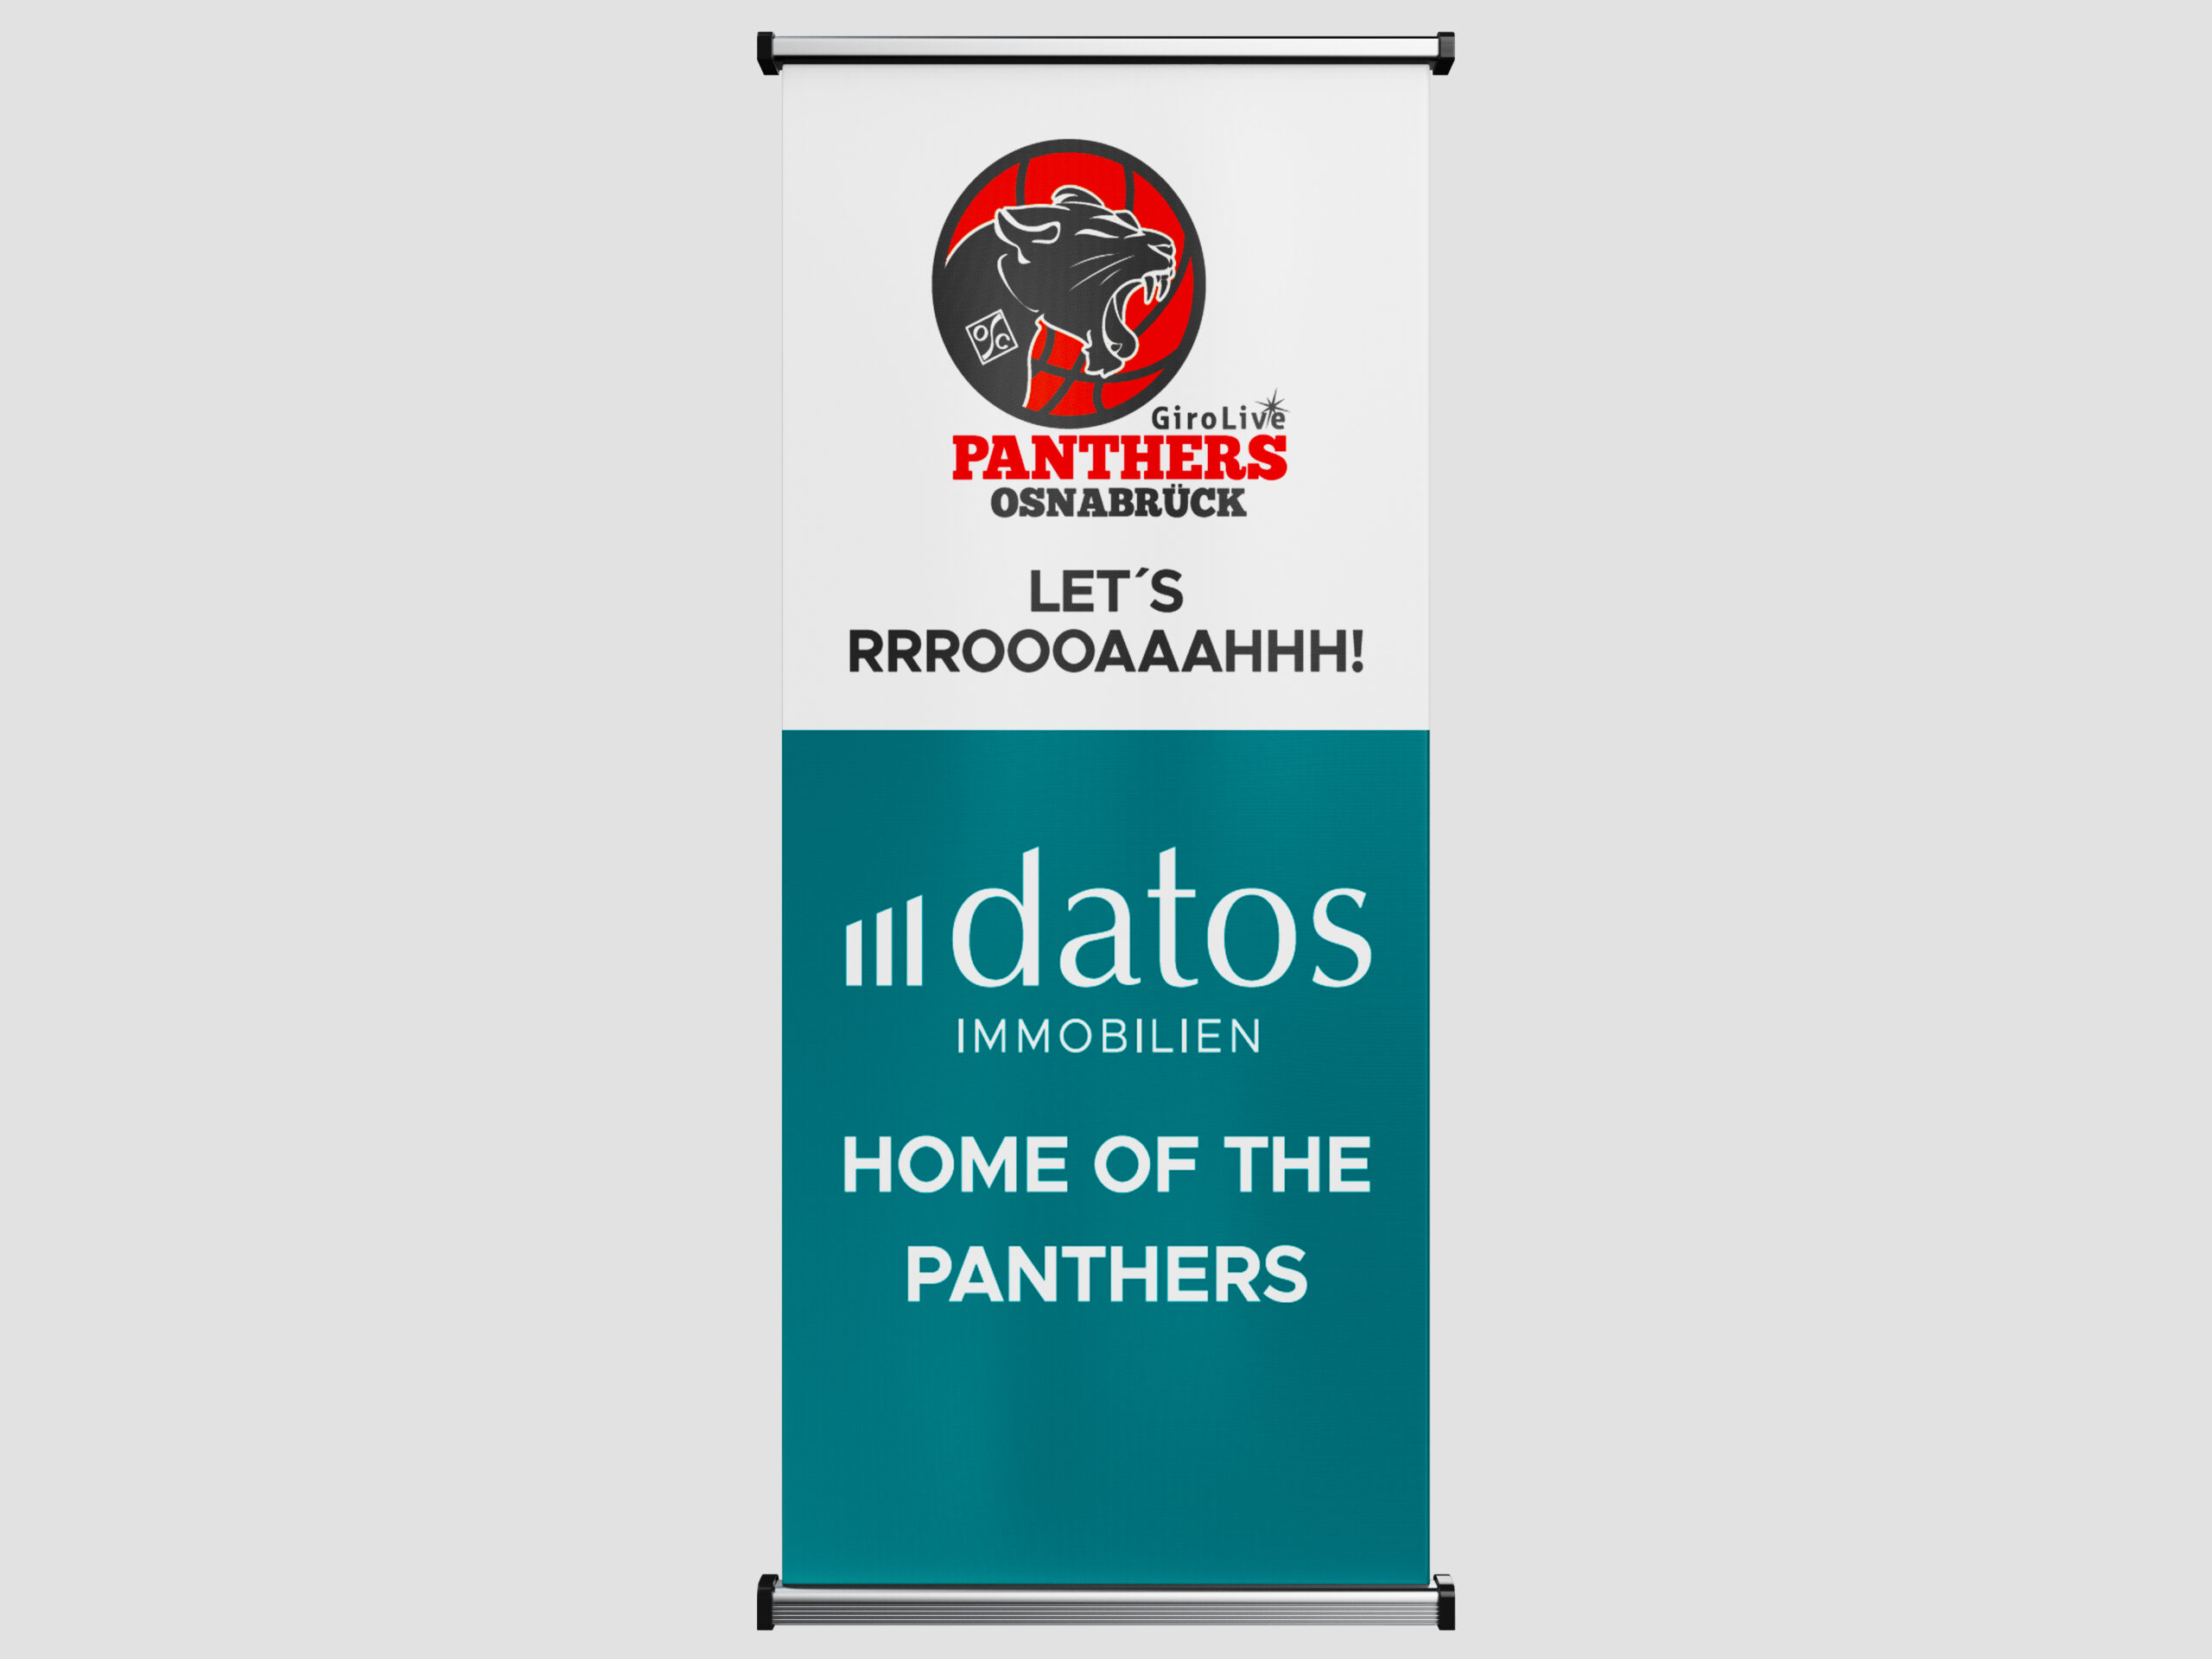 datos - home of the panthers